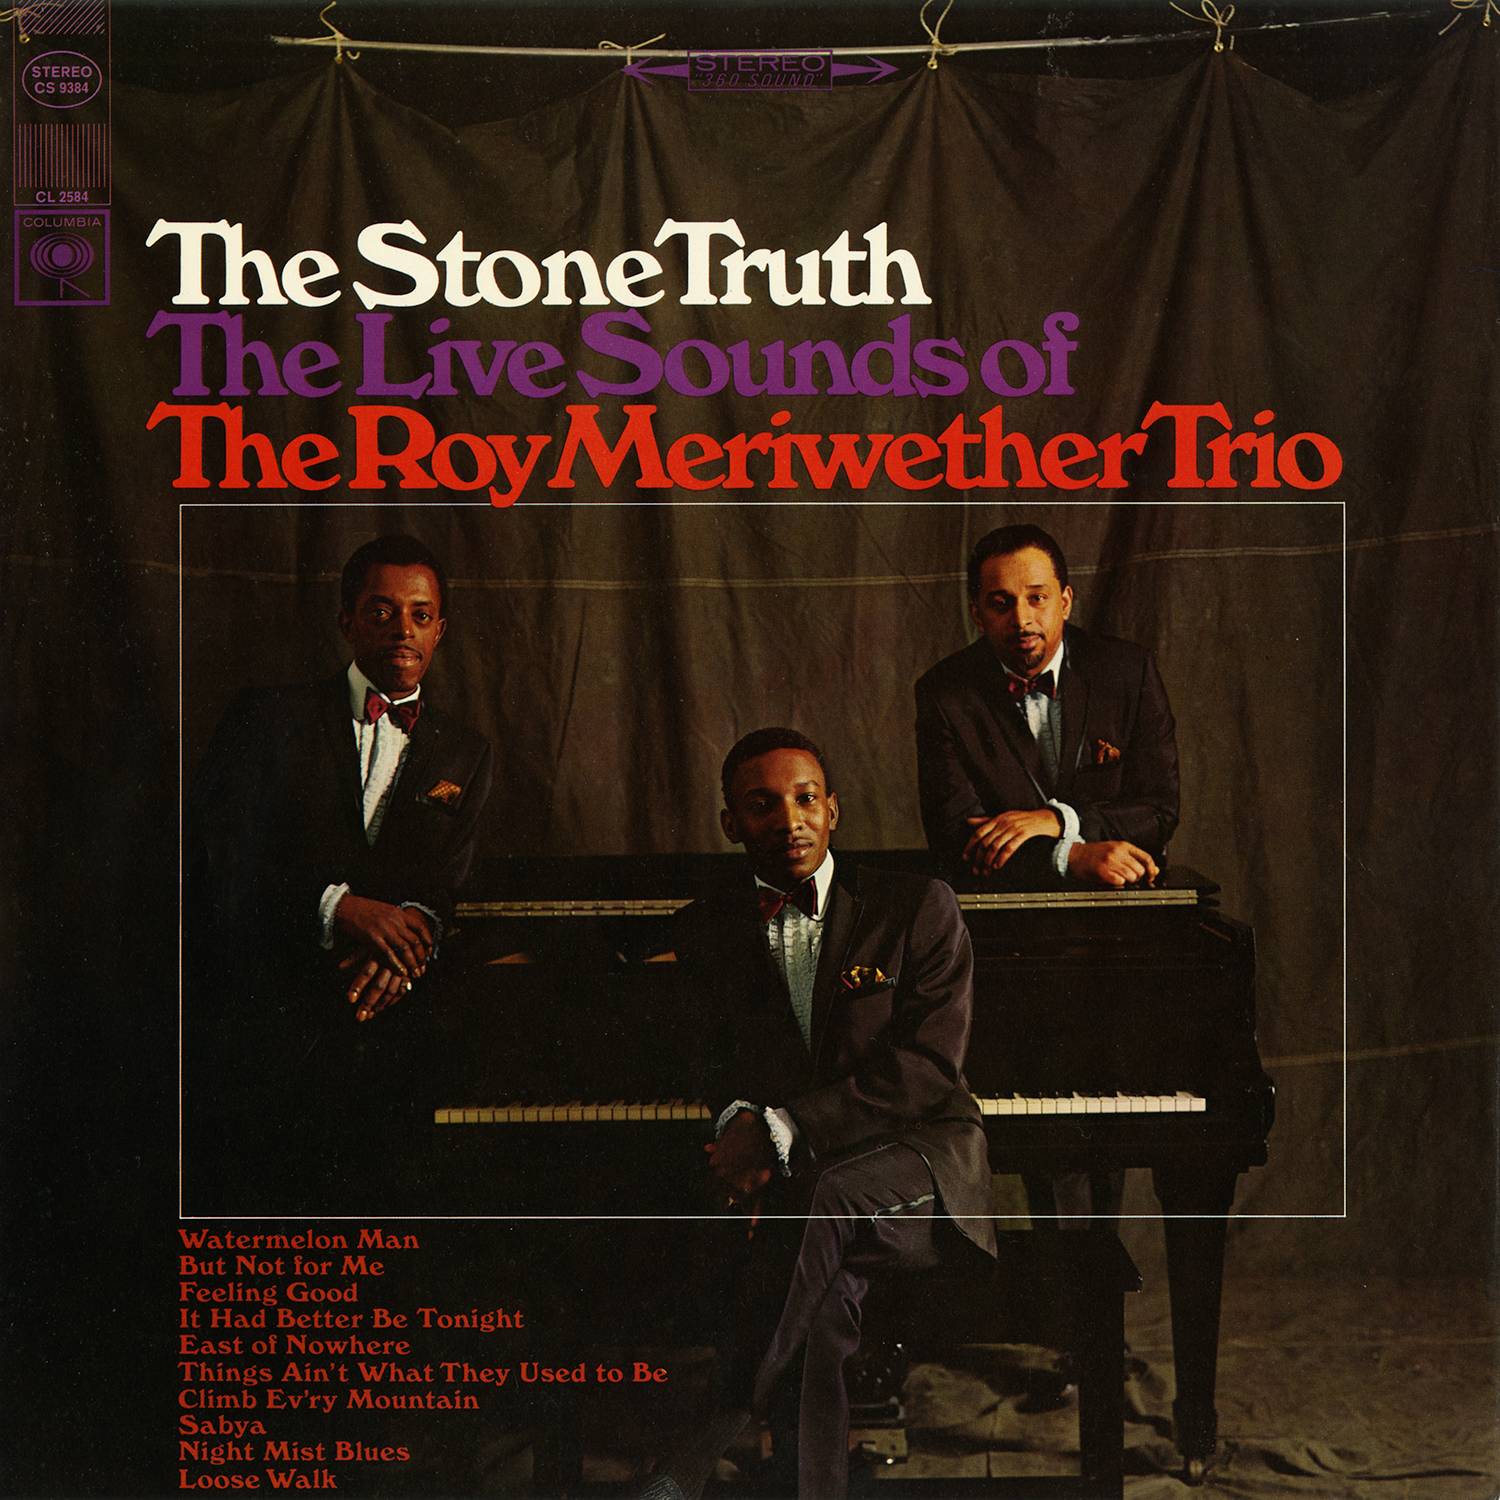 The Roy Meriwether Trio - The Stone Truth (1966/2016) [AcousticSounds FLAC 24bit/192kHz]